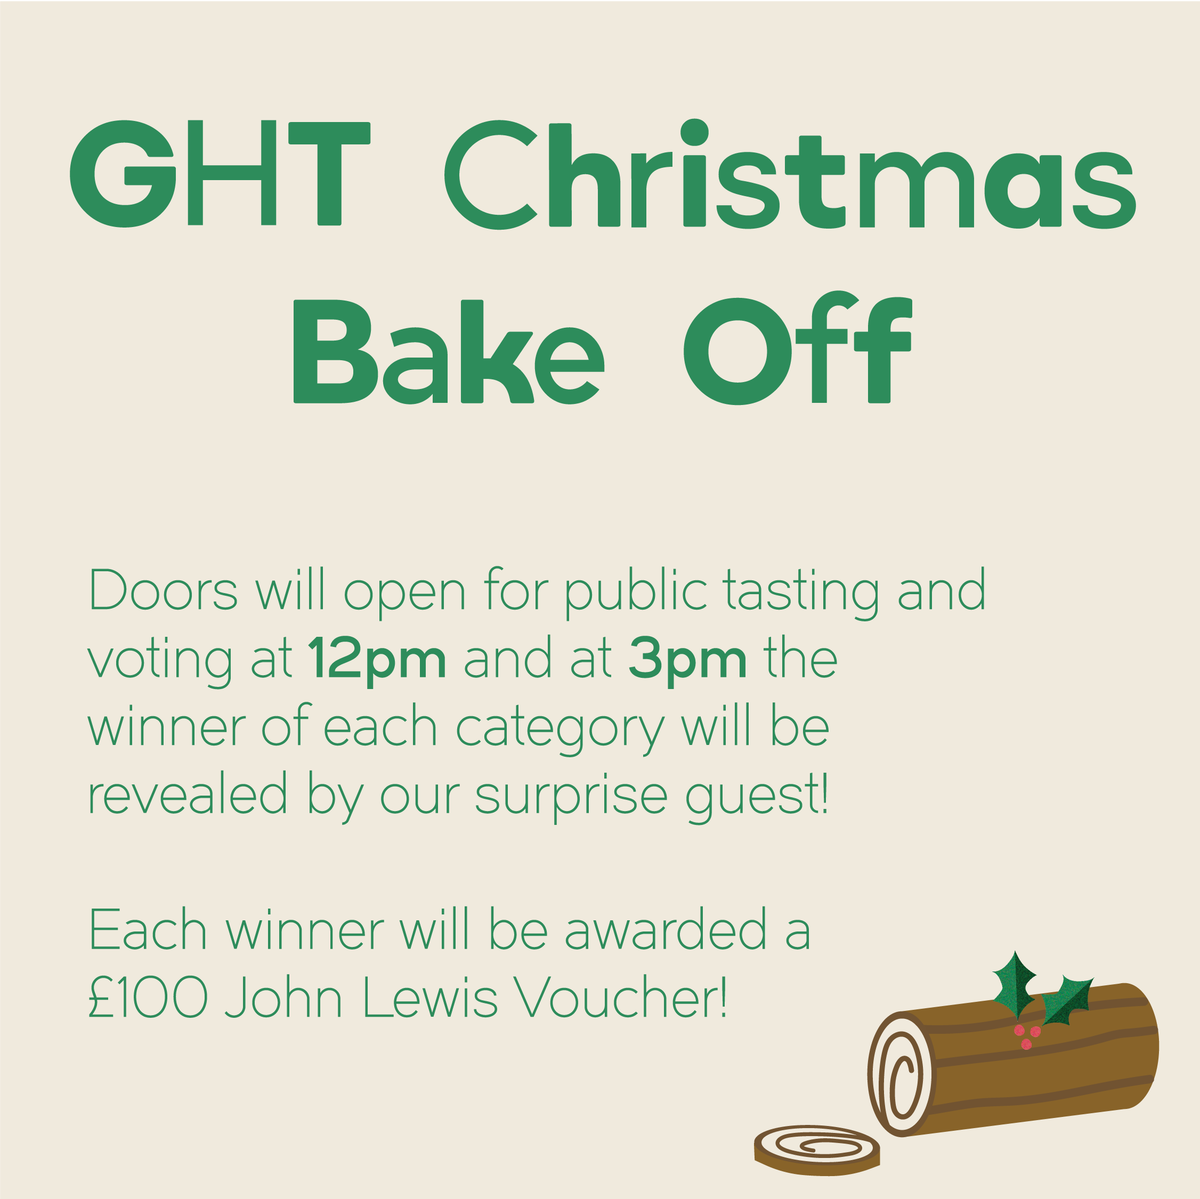 GHT Christmas Bake Off is on Saturday 18th November!

🧑‍🍳 If you're bringing in a bake, sign up here: ow.ly/Bip450Q0v8W
__
#GHT #SotonArts #VisitSoton #Southampton #SupportLocal #HantsDaysOut #aspacearts #SouthamptonFocus #Christmas #FestiveSeason #BakeOff #WhatsOnAtGHT